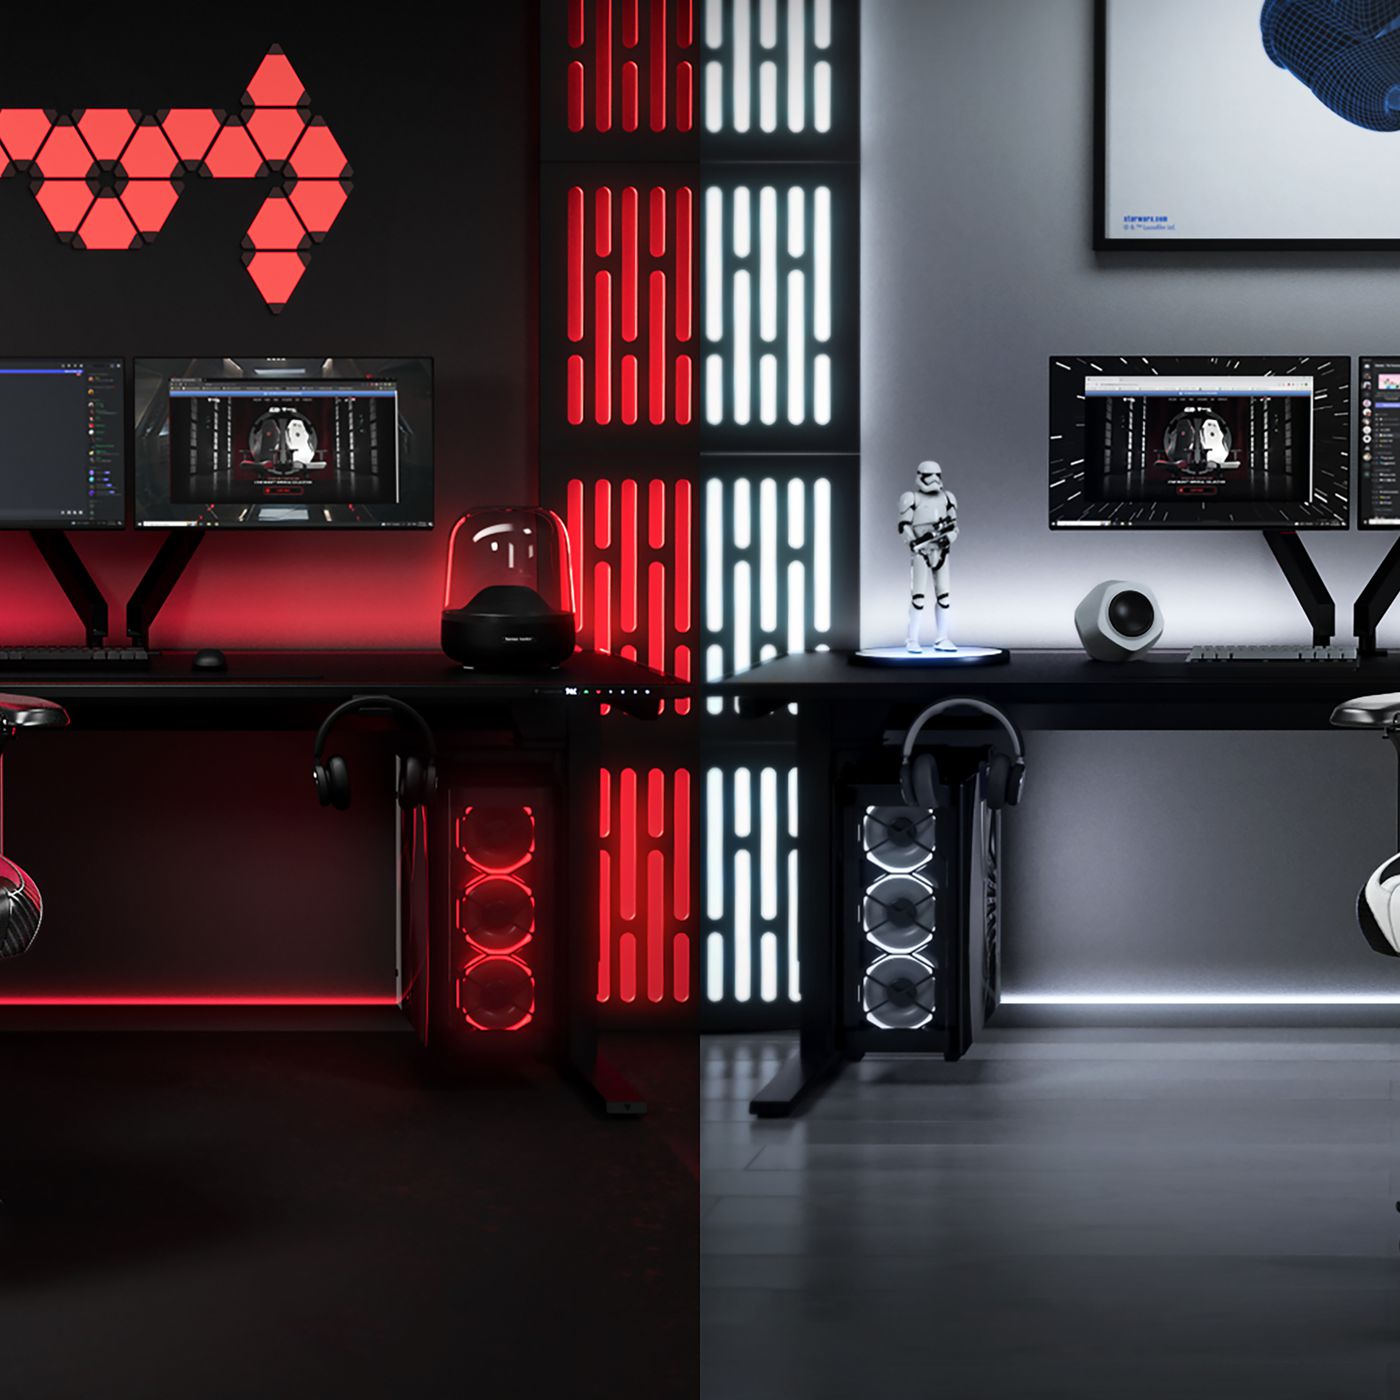 Star Wars Secretlab gaming chairs are now available to buy